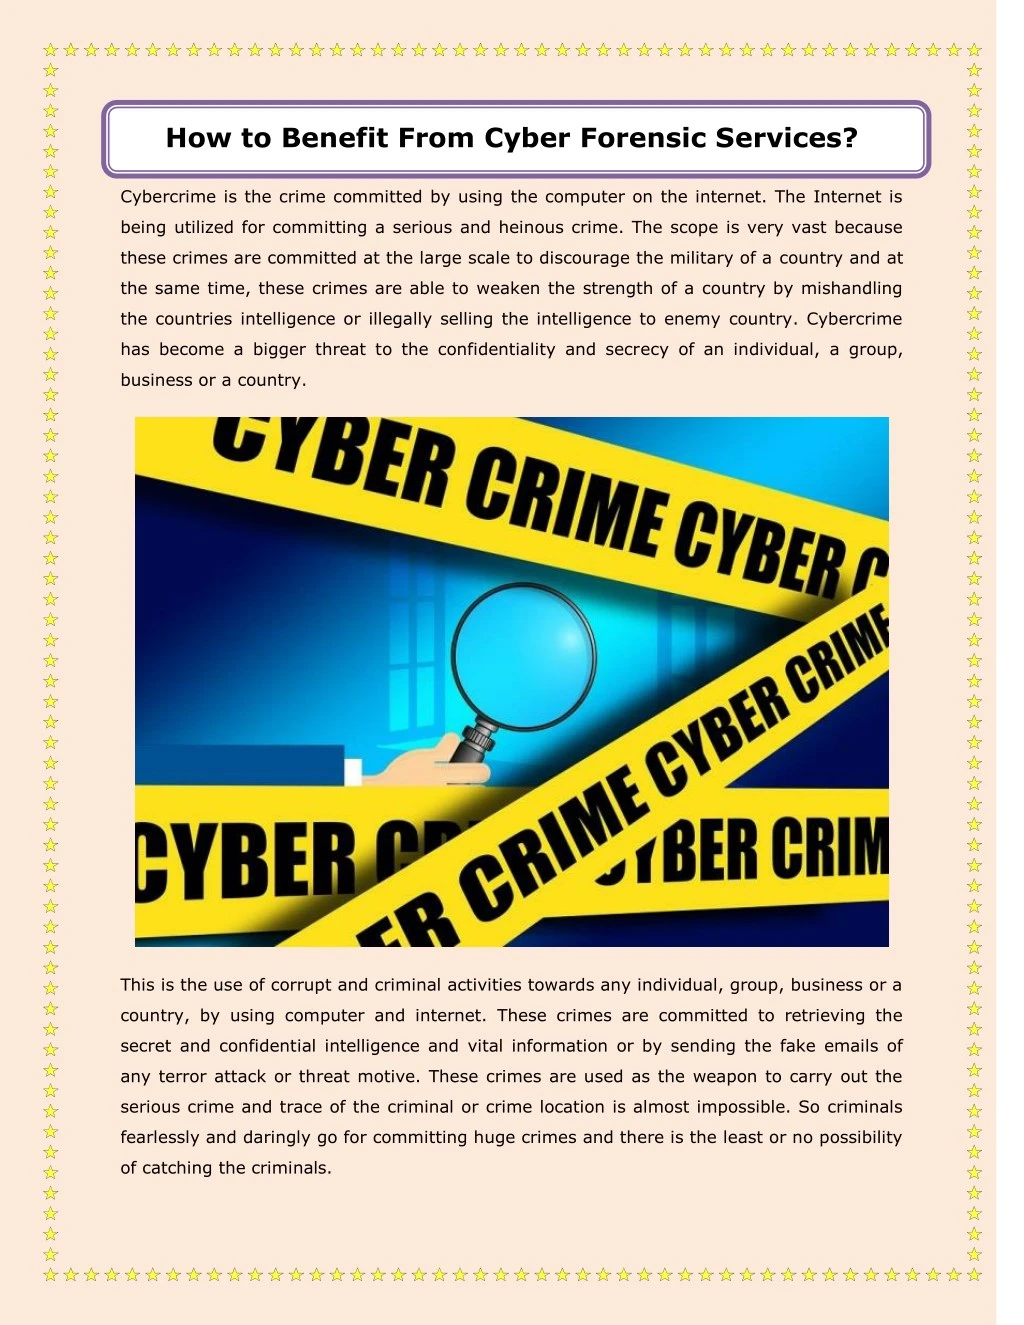 how to benefit from cyber forensic services